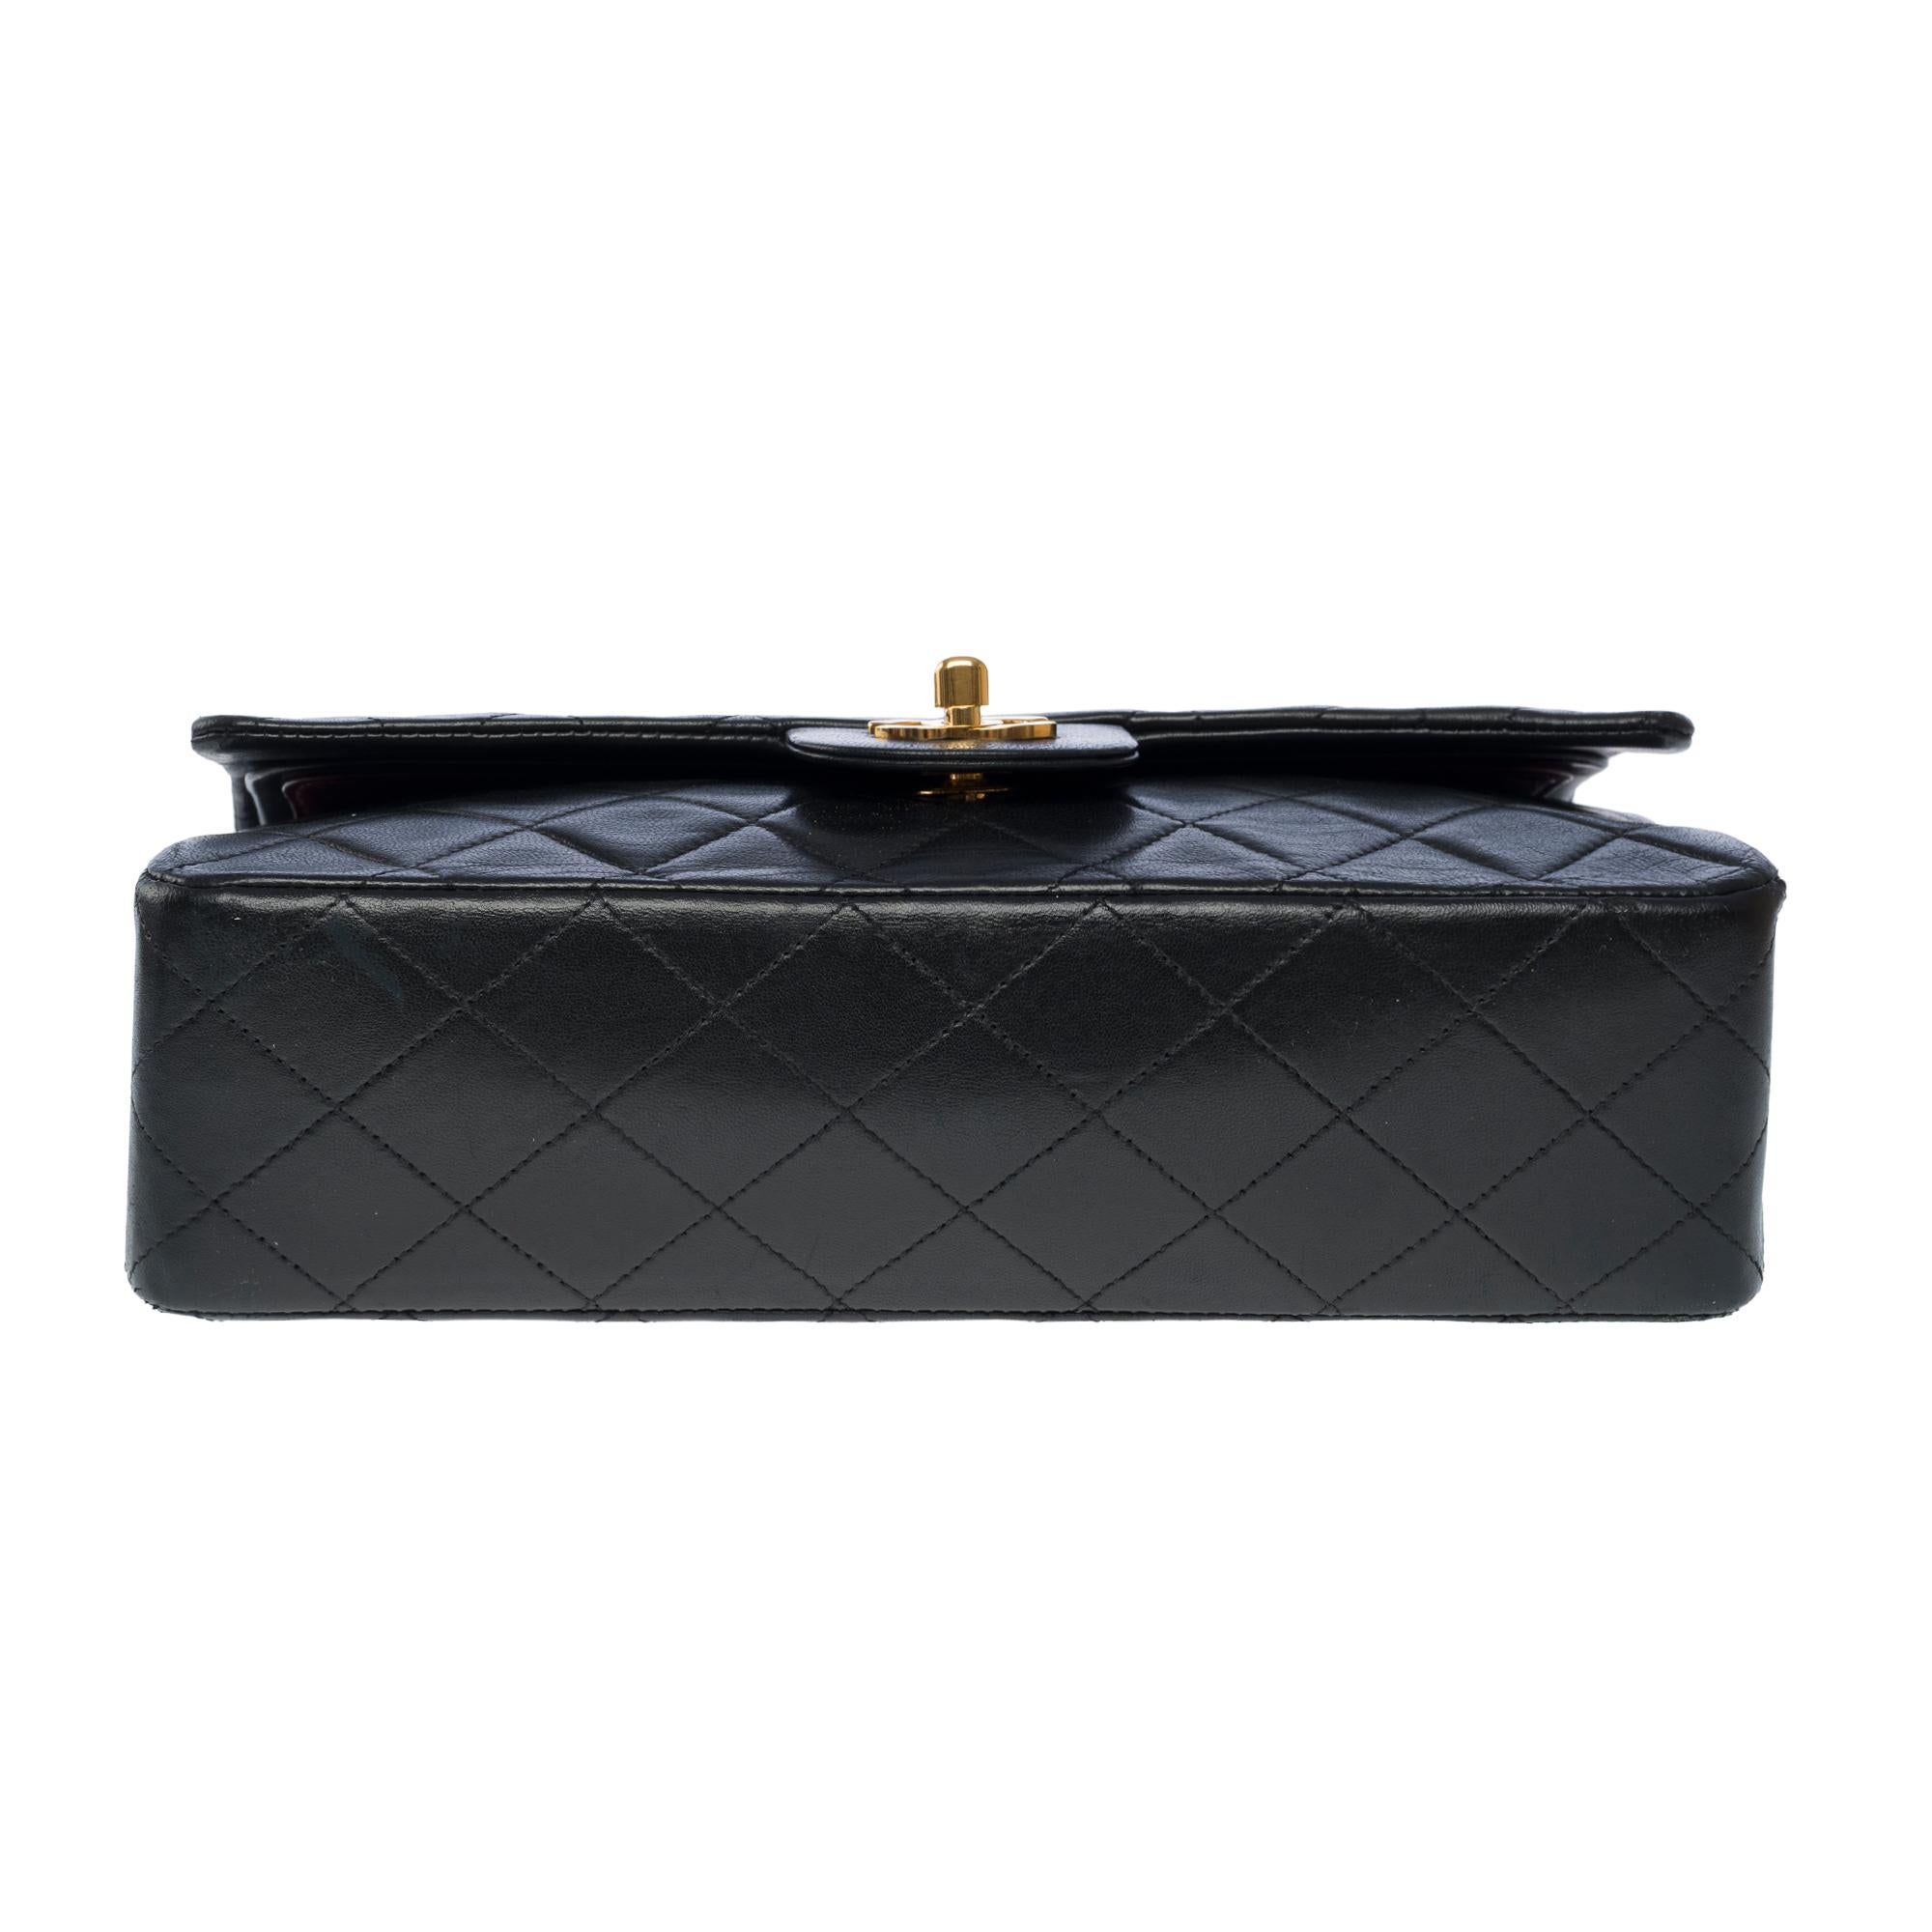 Chanel Timeless double flap shoulder bag in black quilted lambskin leather, GHW For Sale 7